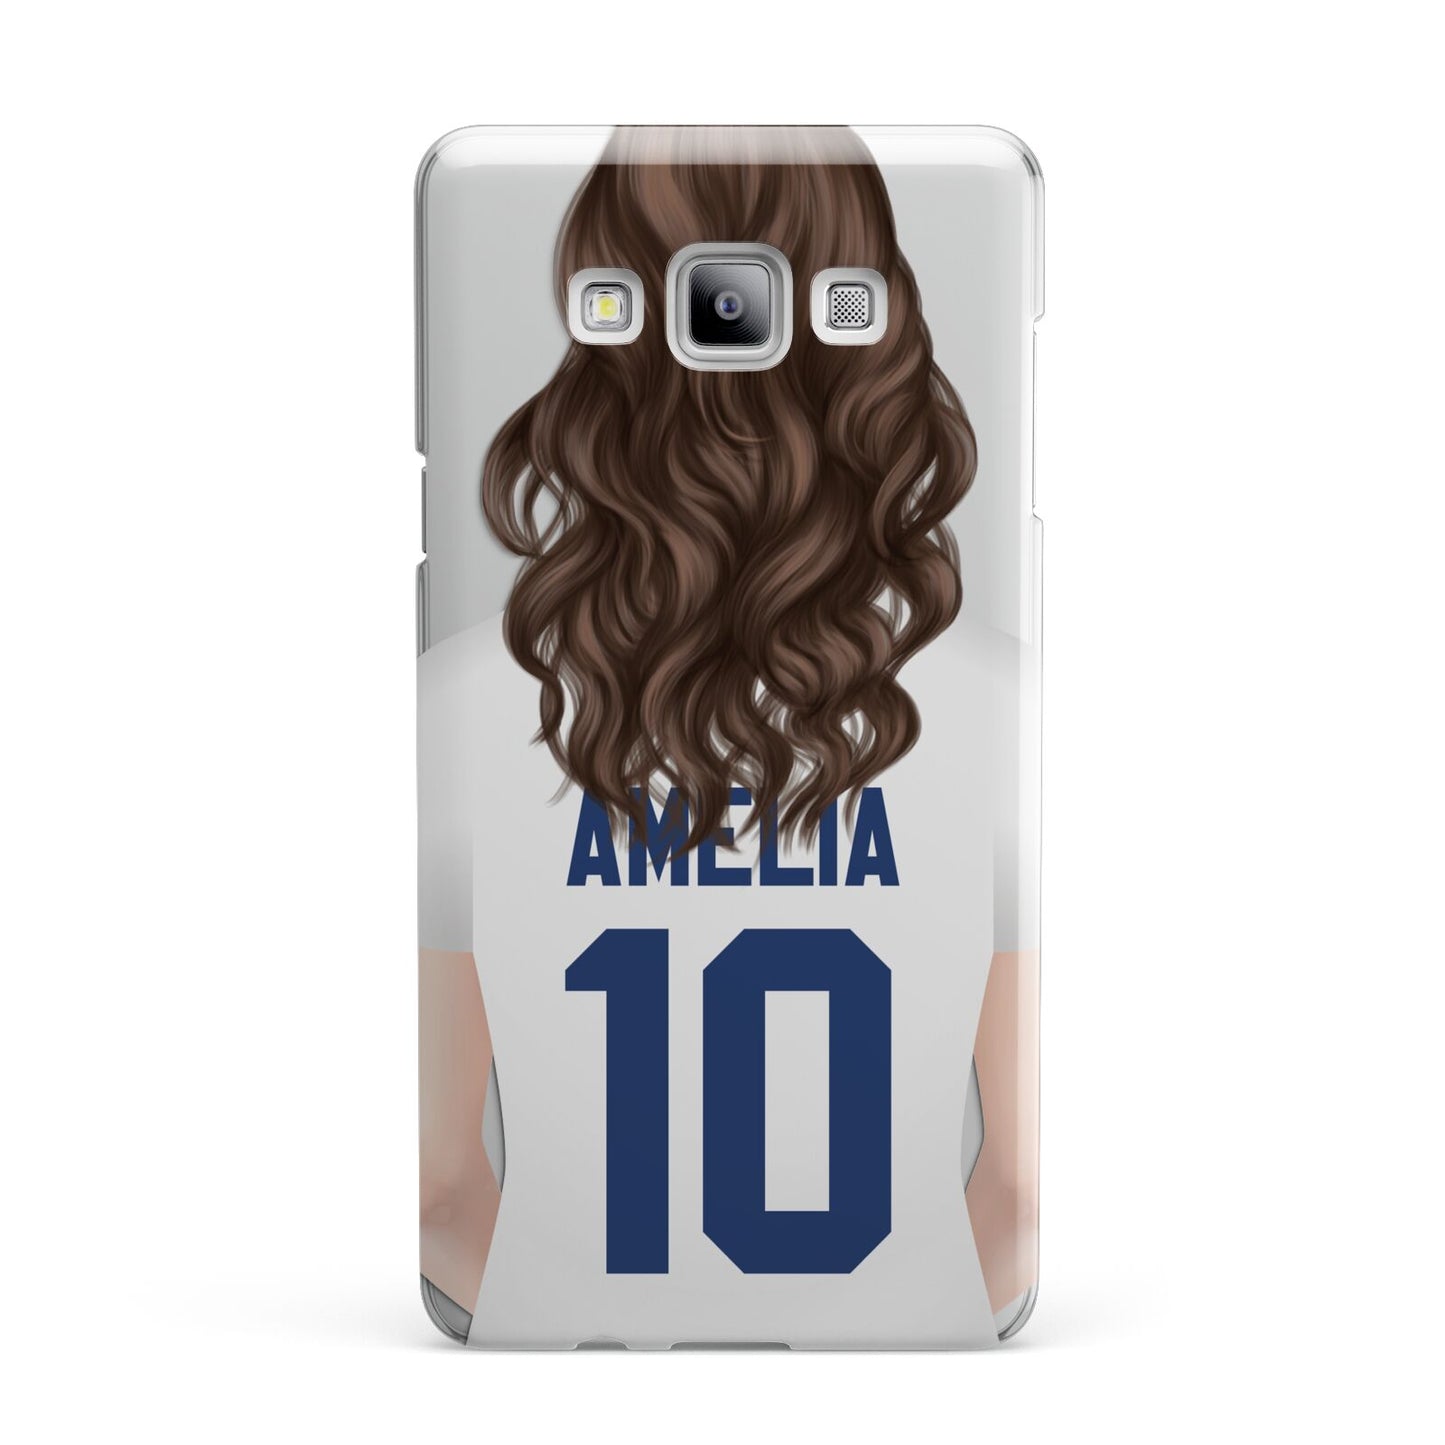 Womens Footballer Personalised Samsung Galaxy A7 2015 Case